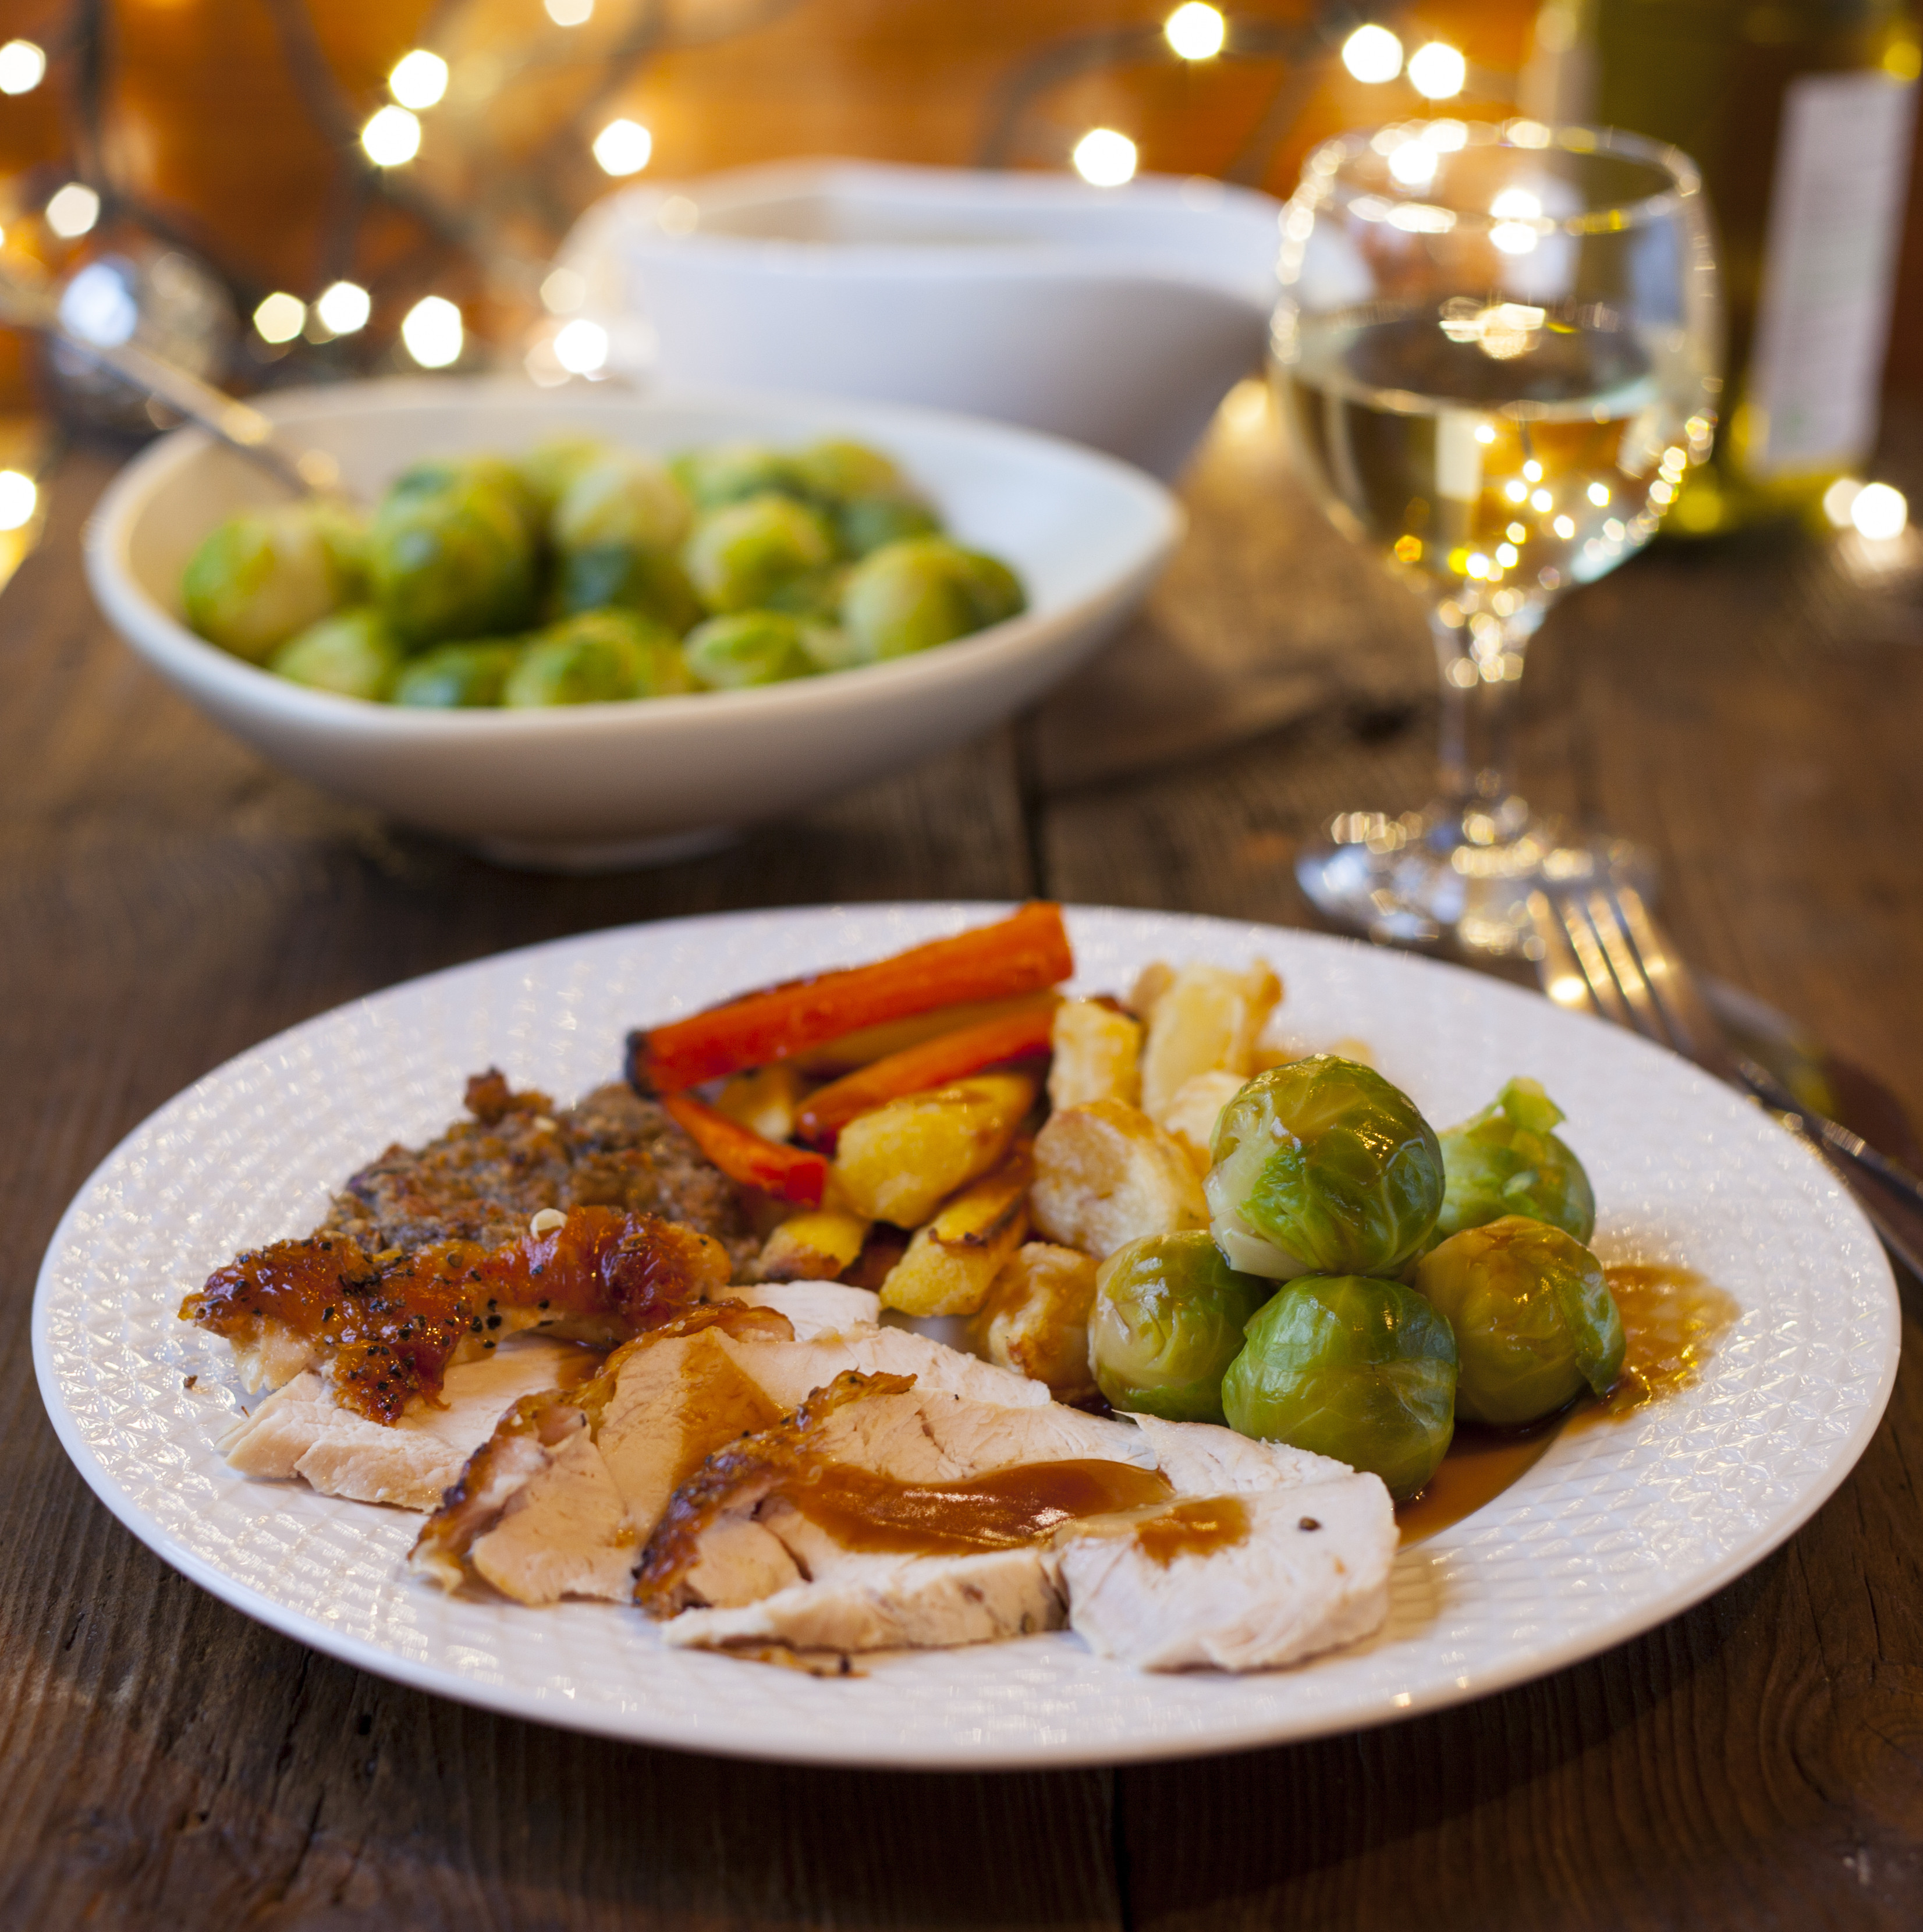 Images Of Christmas Dinners
 Healthy recipes of the month Christmas dinner leftovers